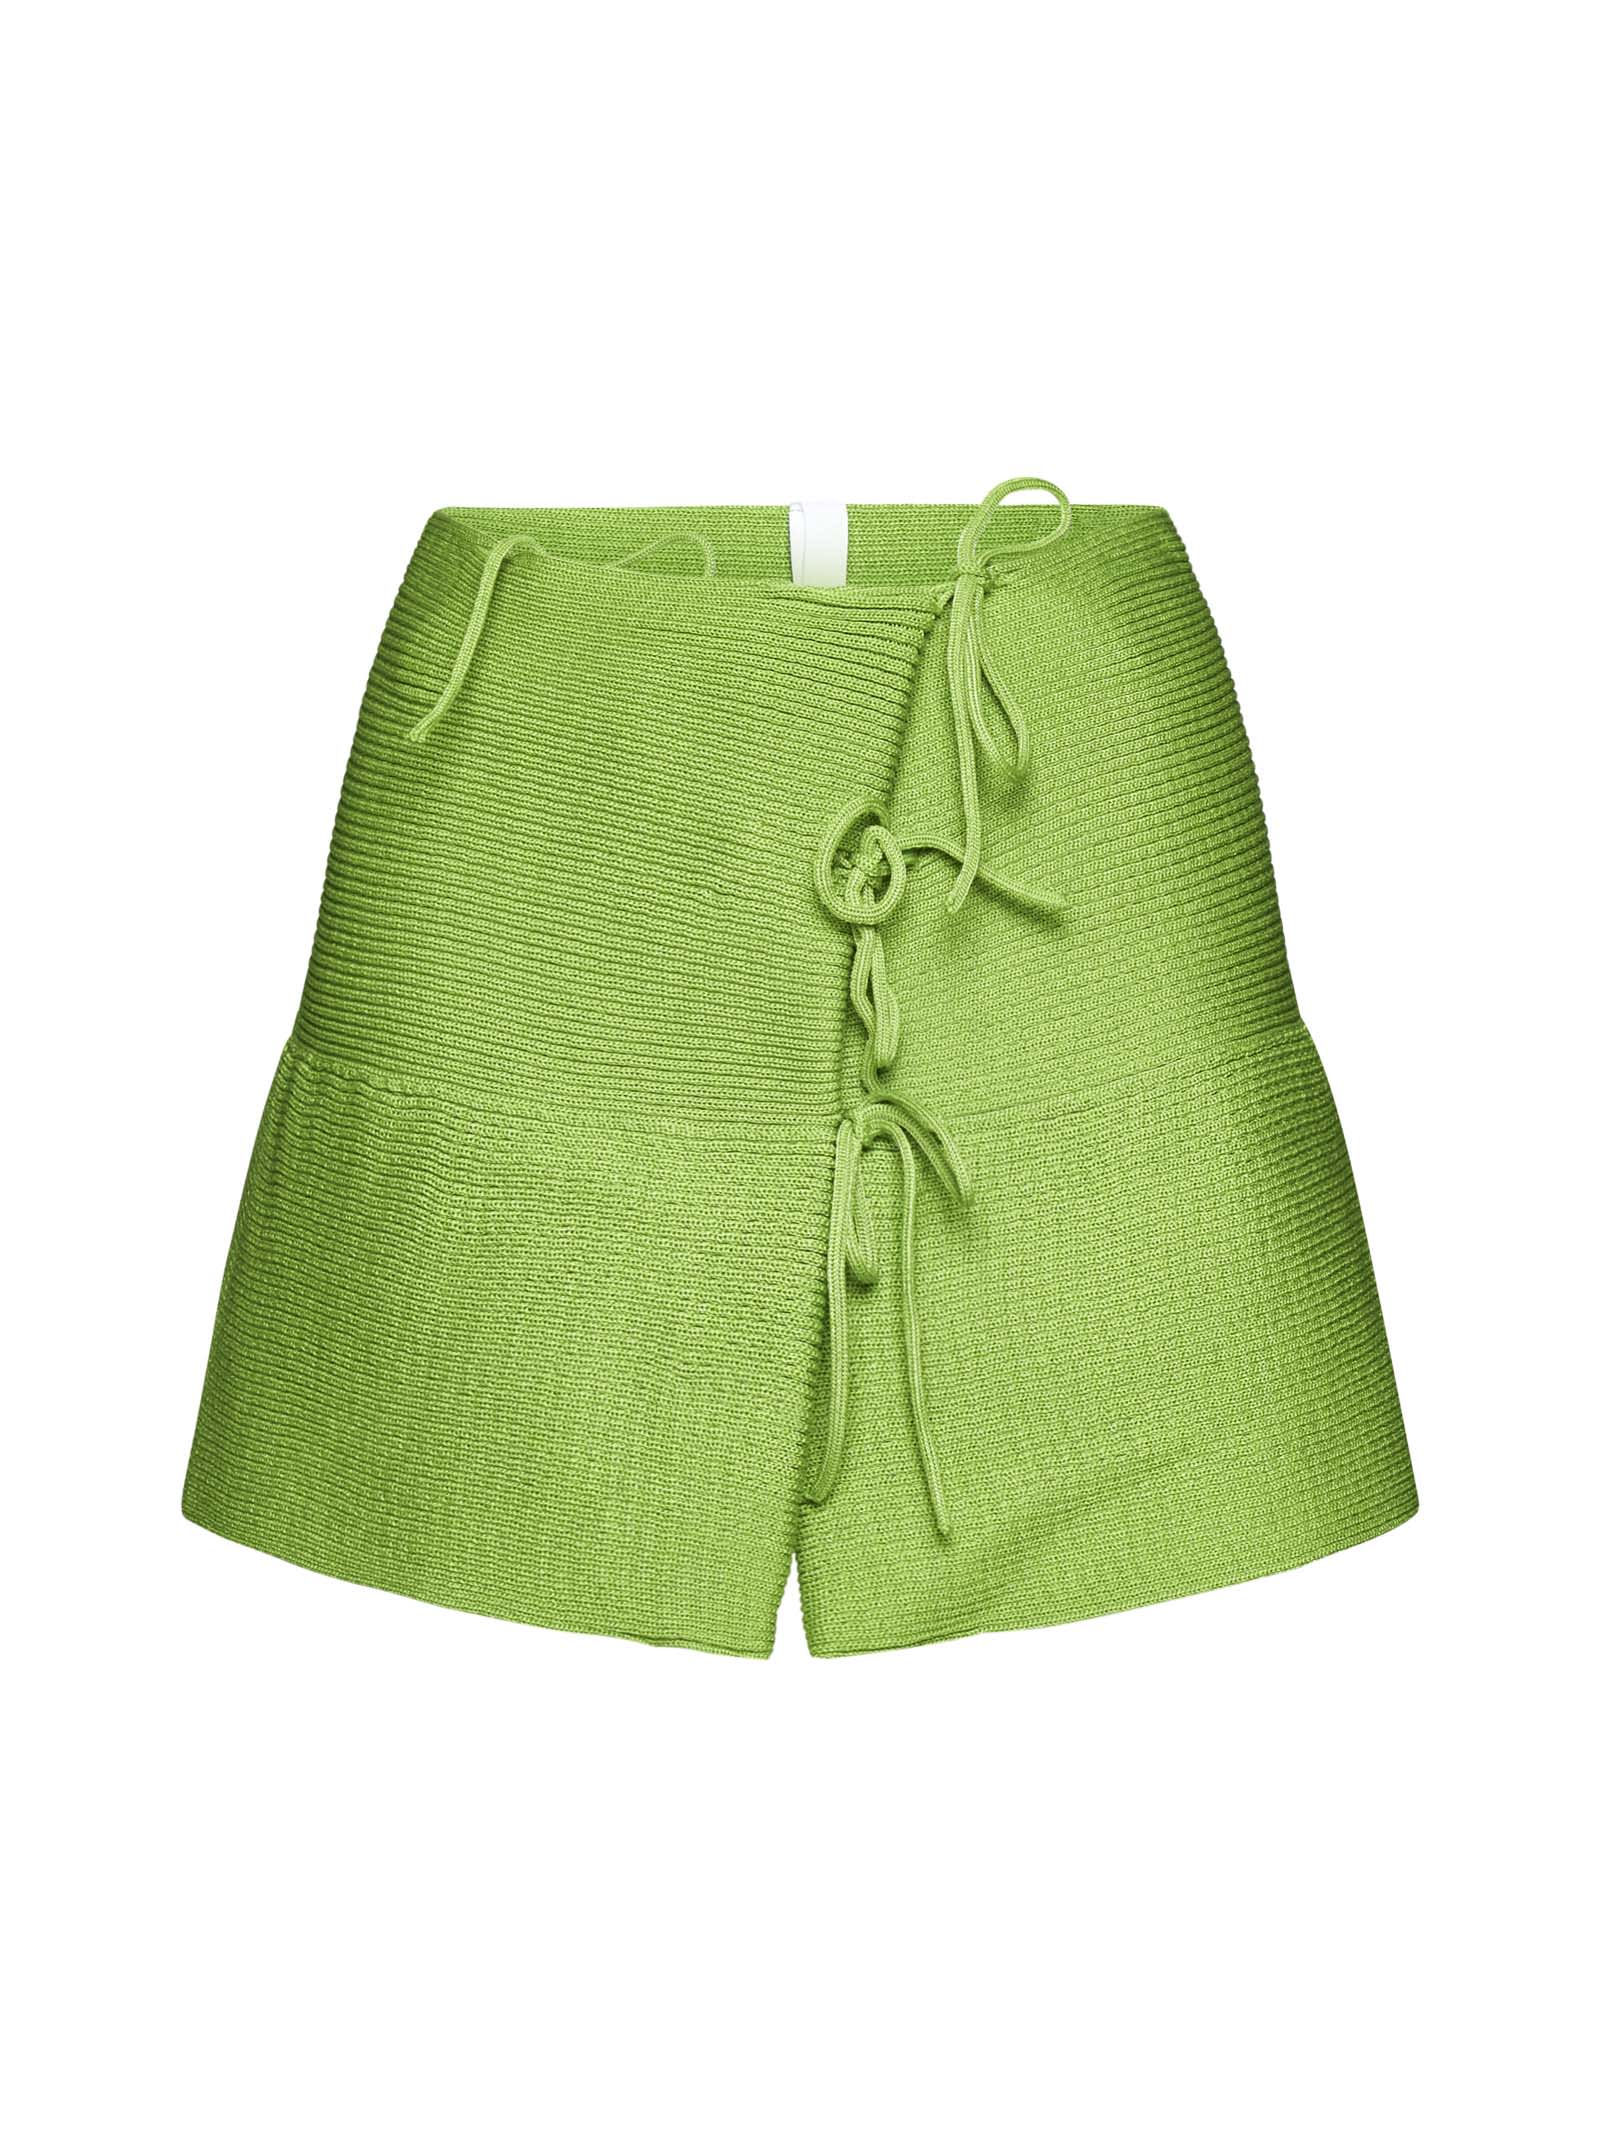 A. Roege Hove Skirt In Apple Green